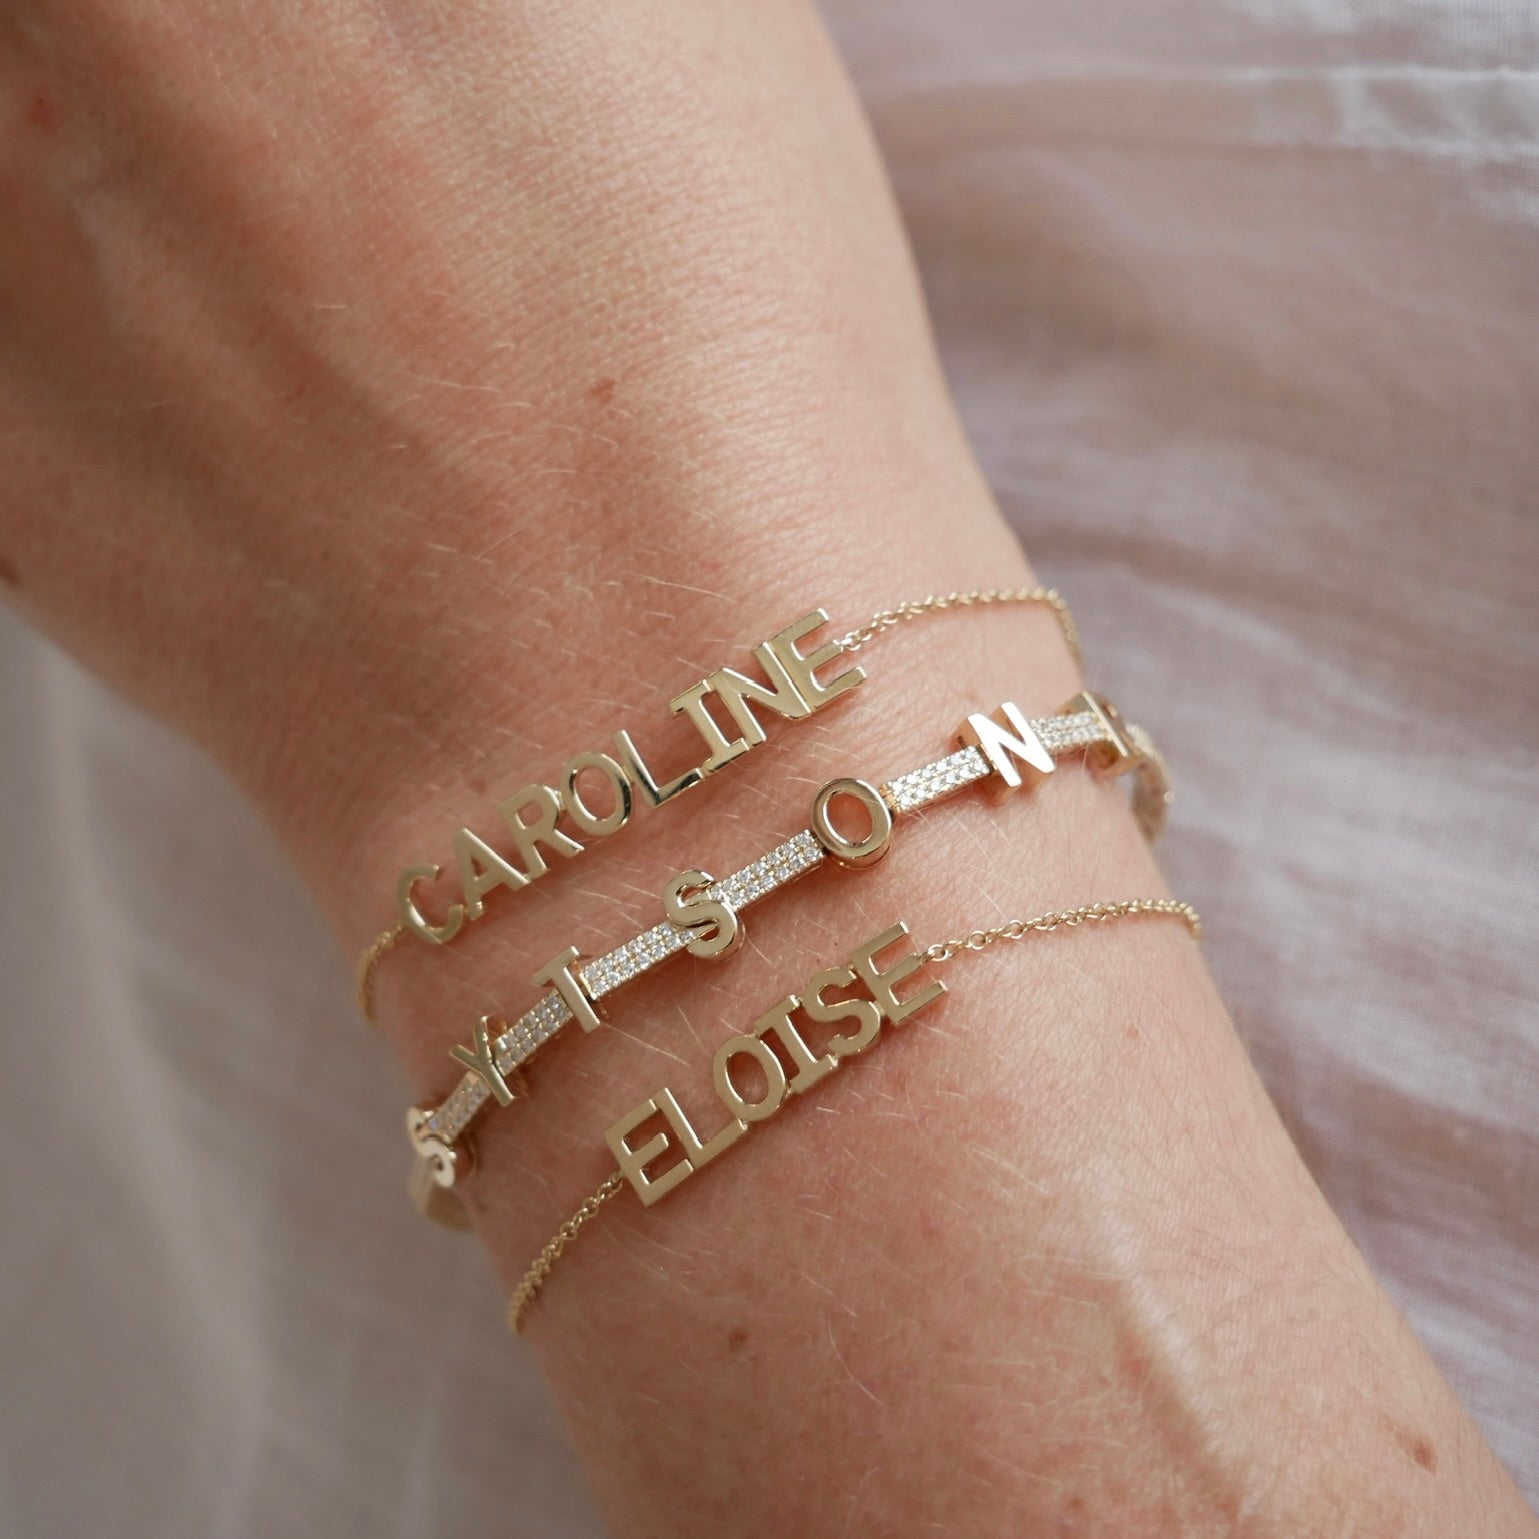 Gold Custom Name Bracelet styled on the wrist in yellow gold